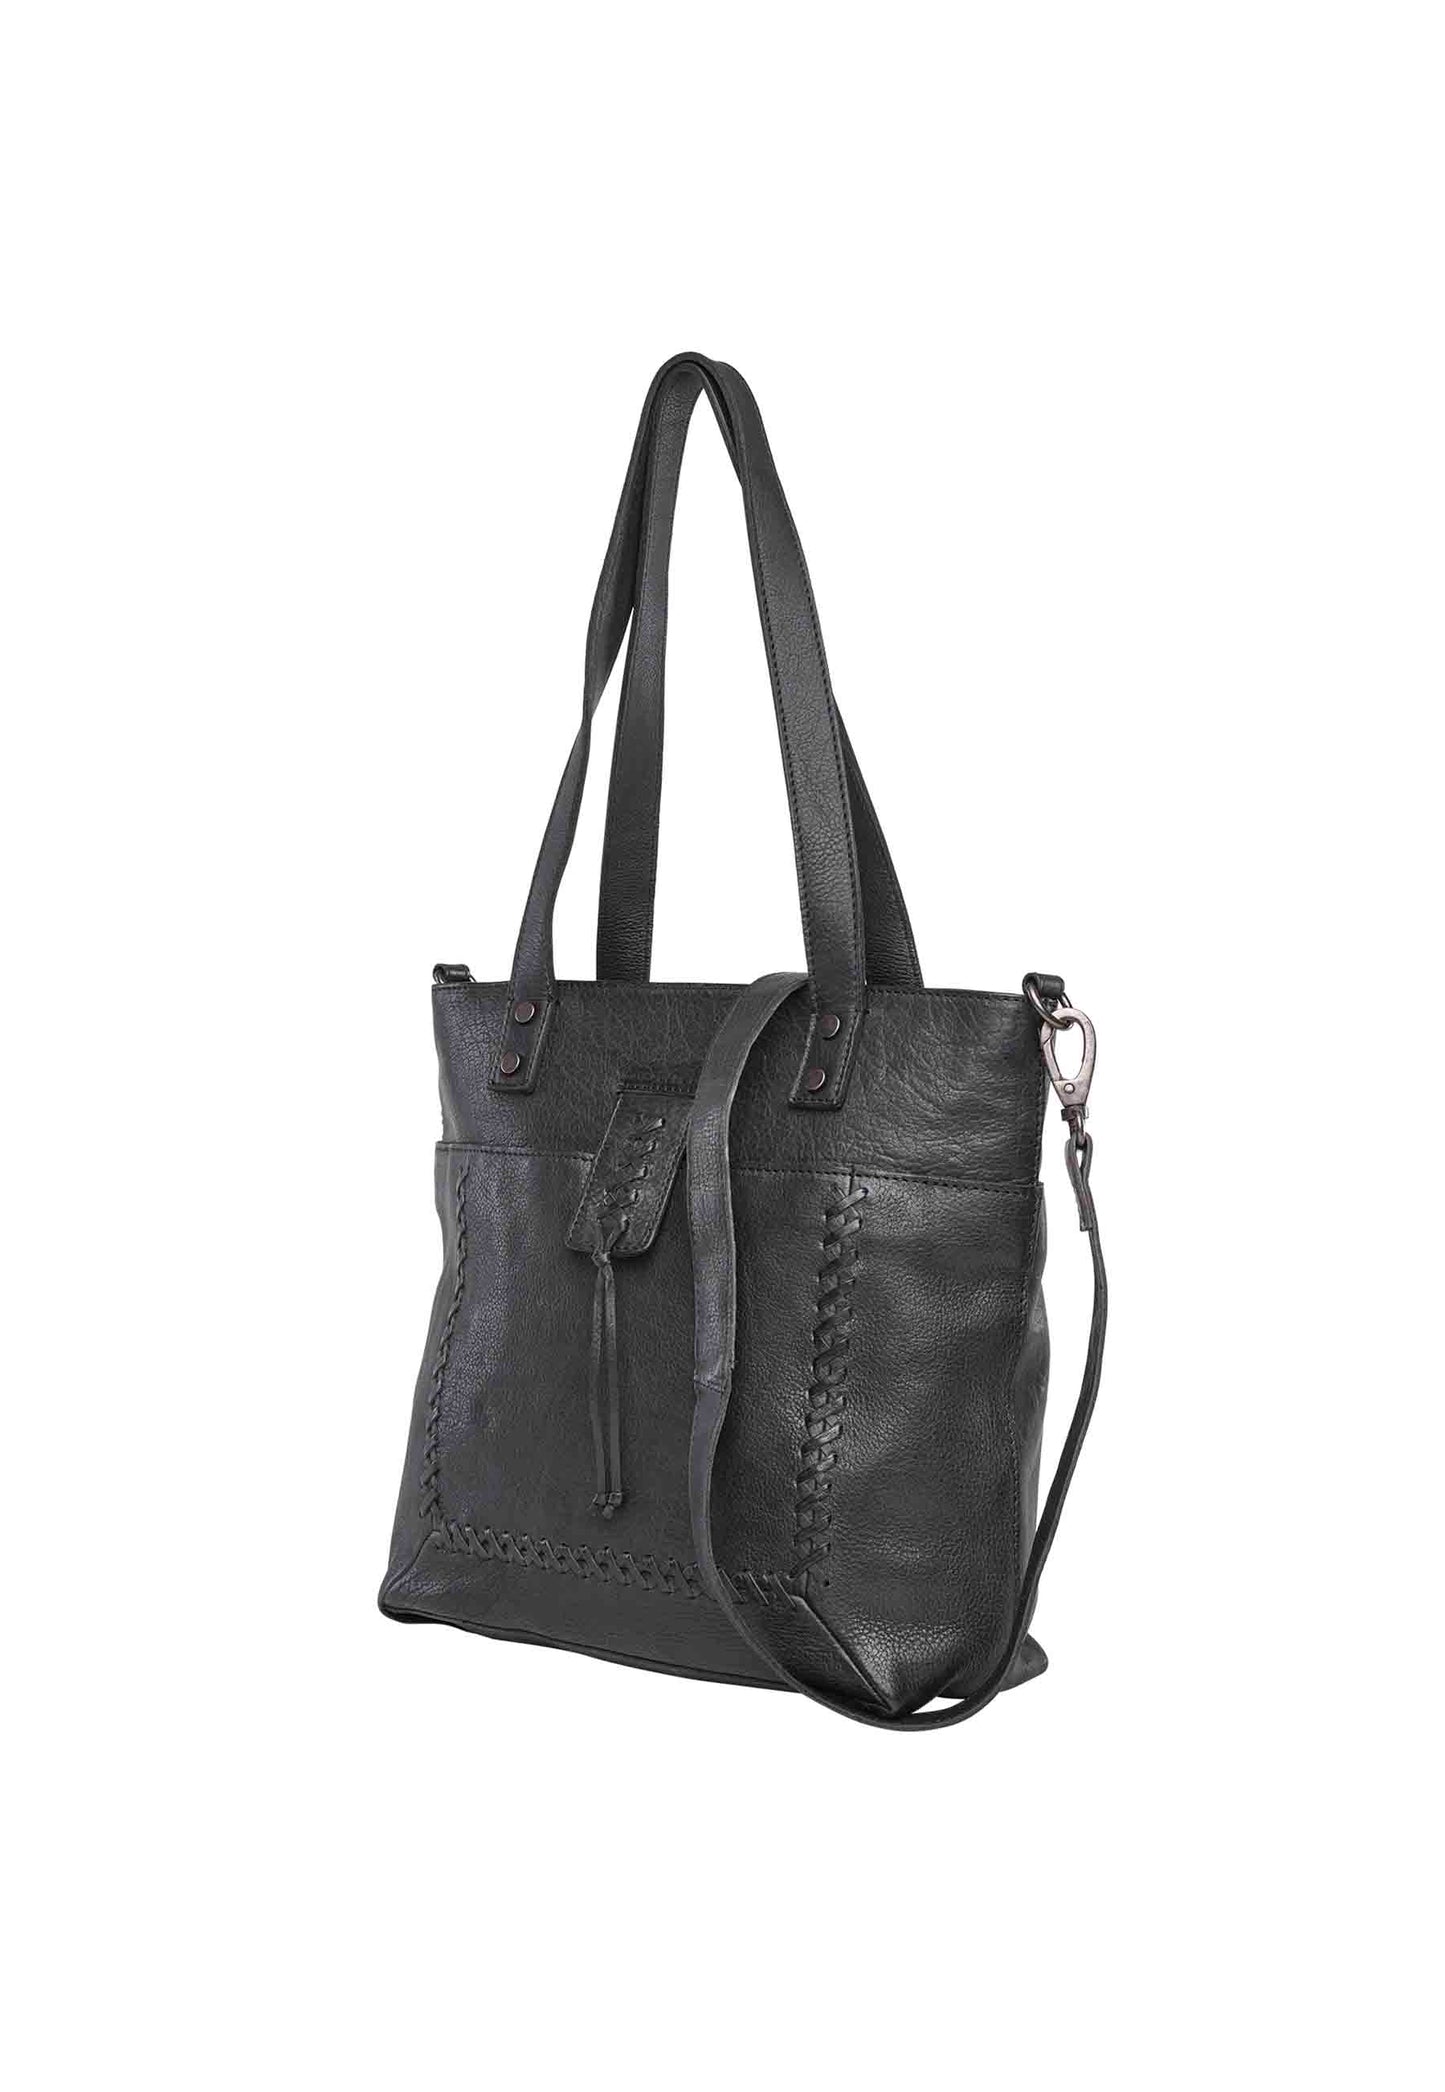 side view of high end concealed carry handbag